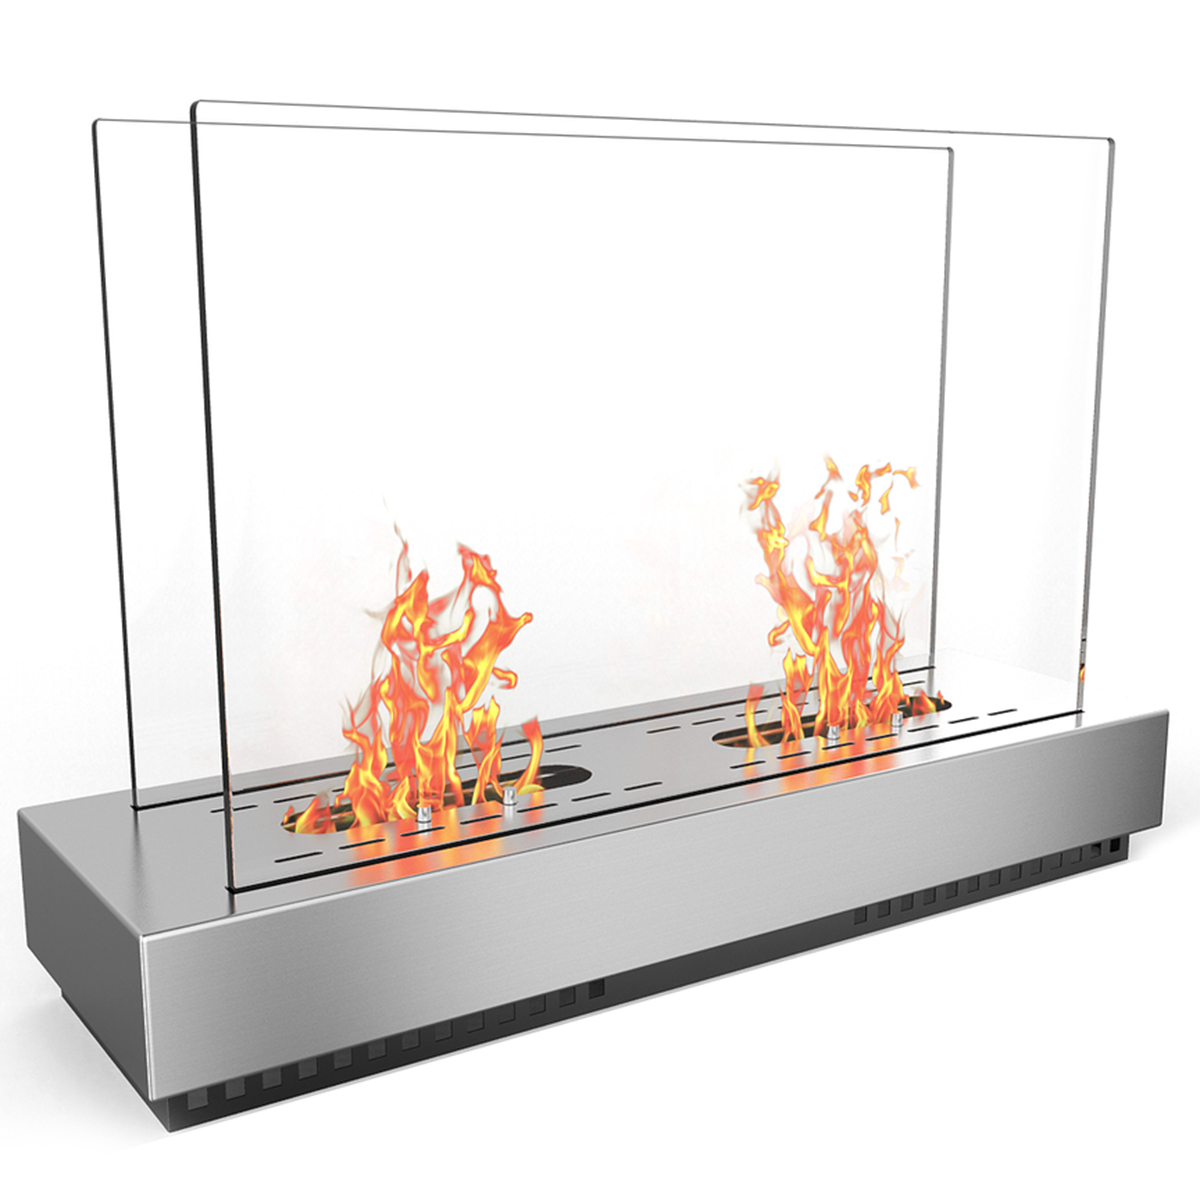 Ef6009-mf Phoenix Ventless Free Standing Ethanol Fireplace In Stainless Steel